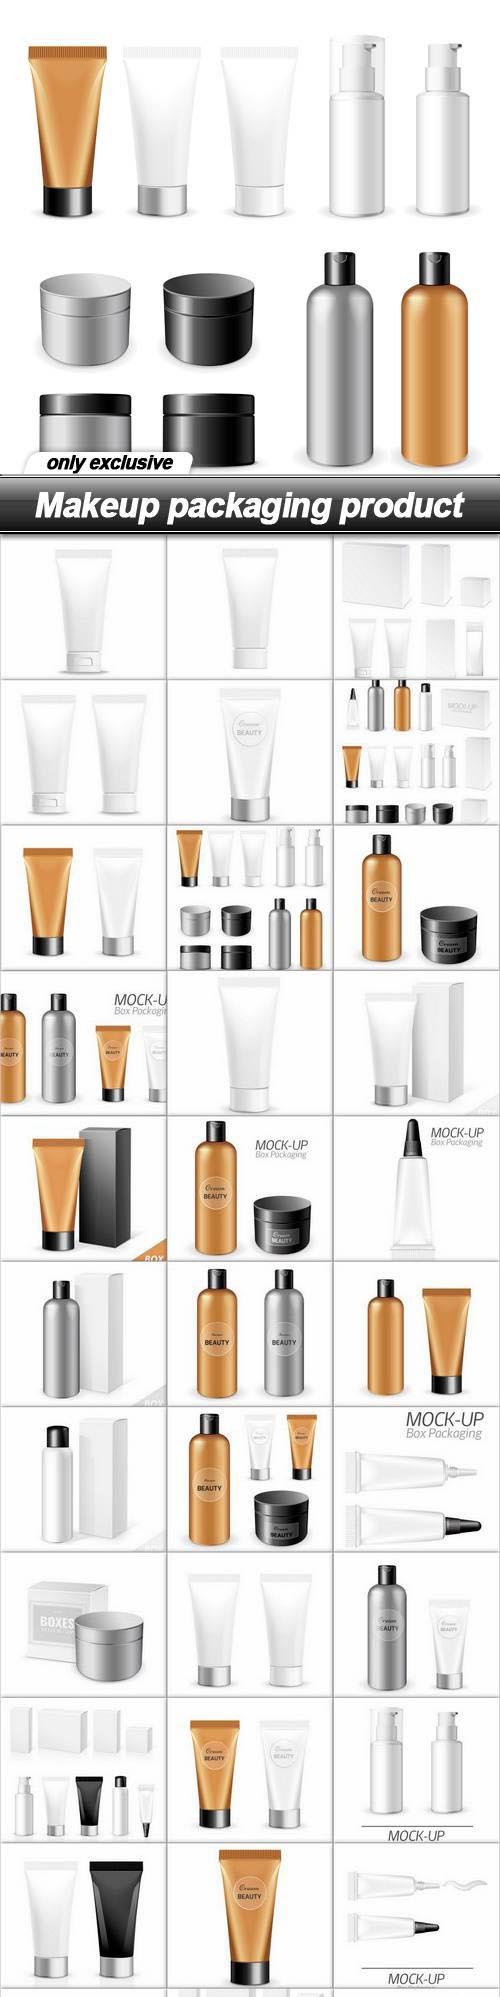 Makeup packaging product